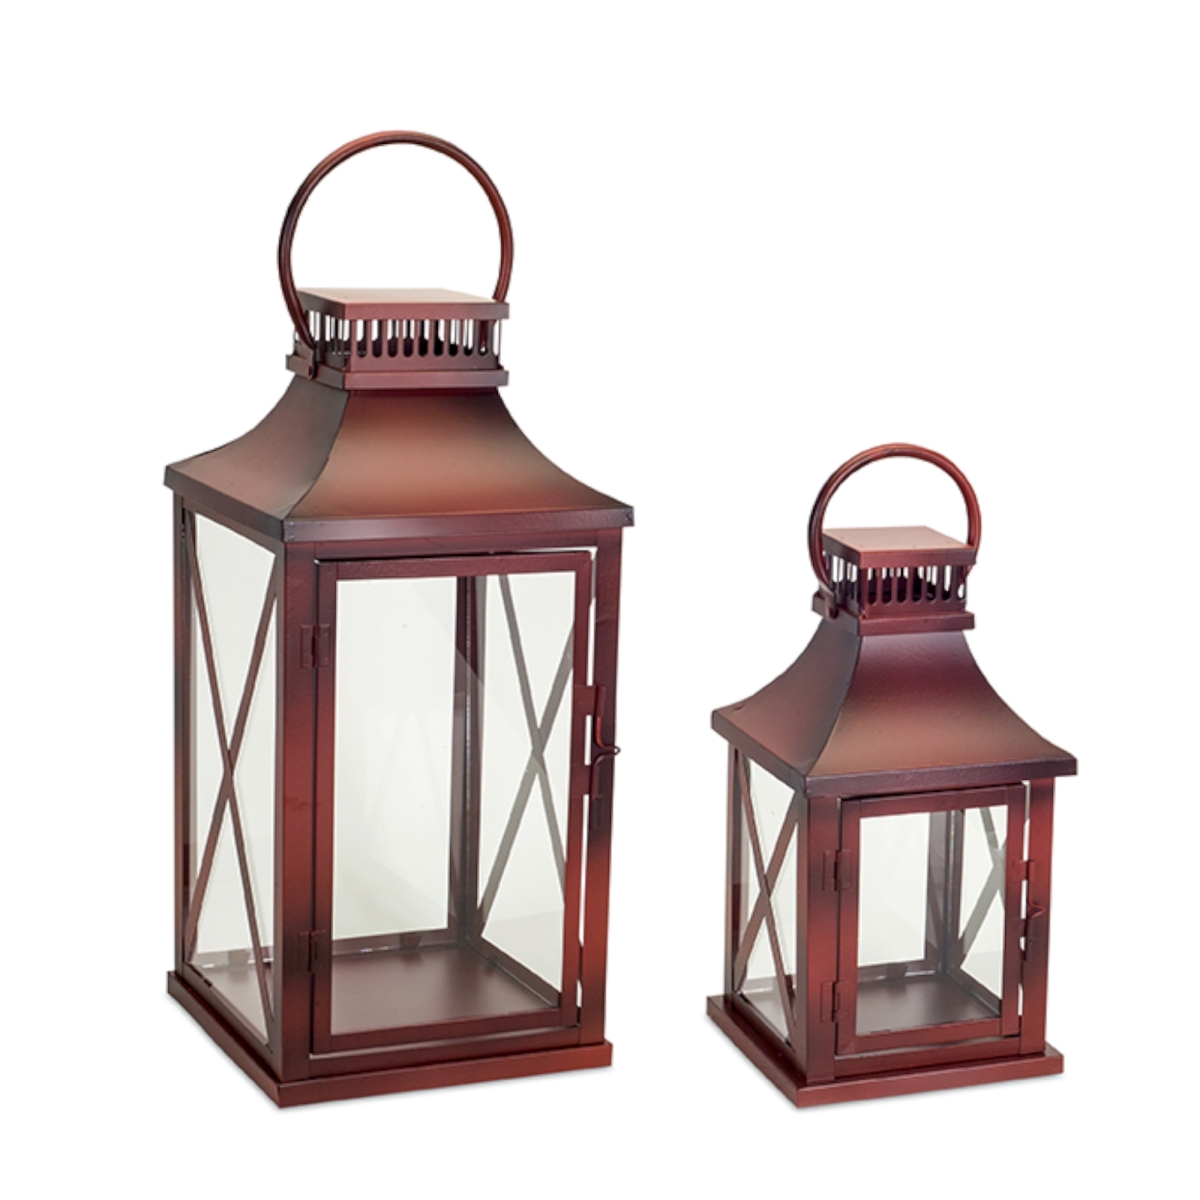 73621ds 14 X 20 In. Metal & Glass Lantern, Red - Set Of 2